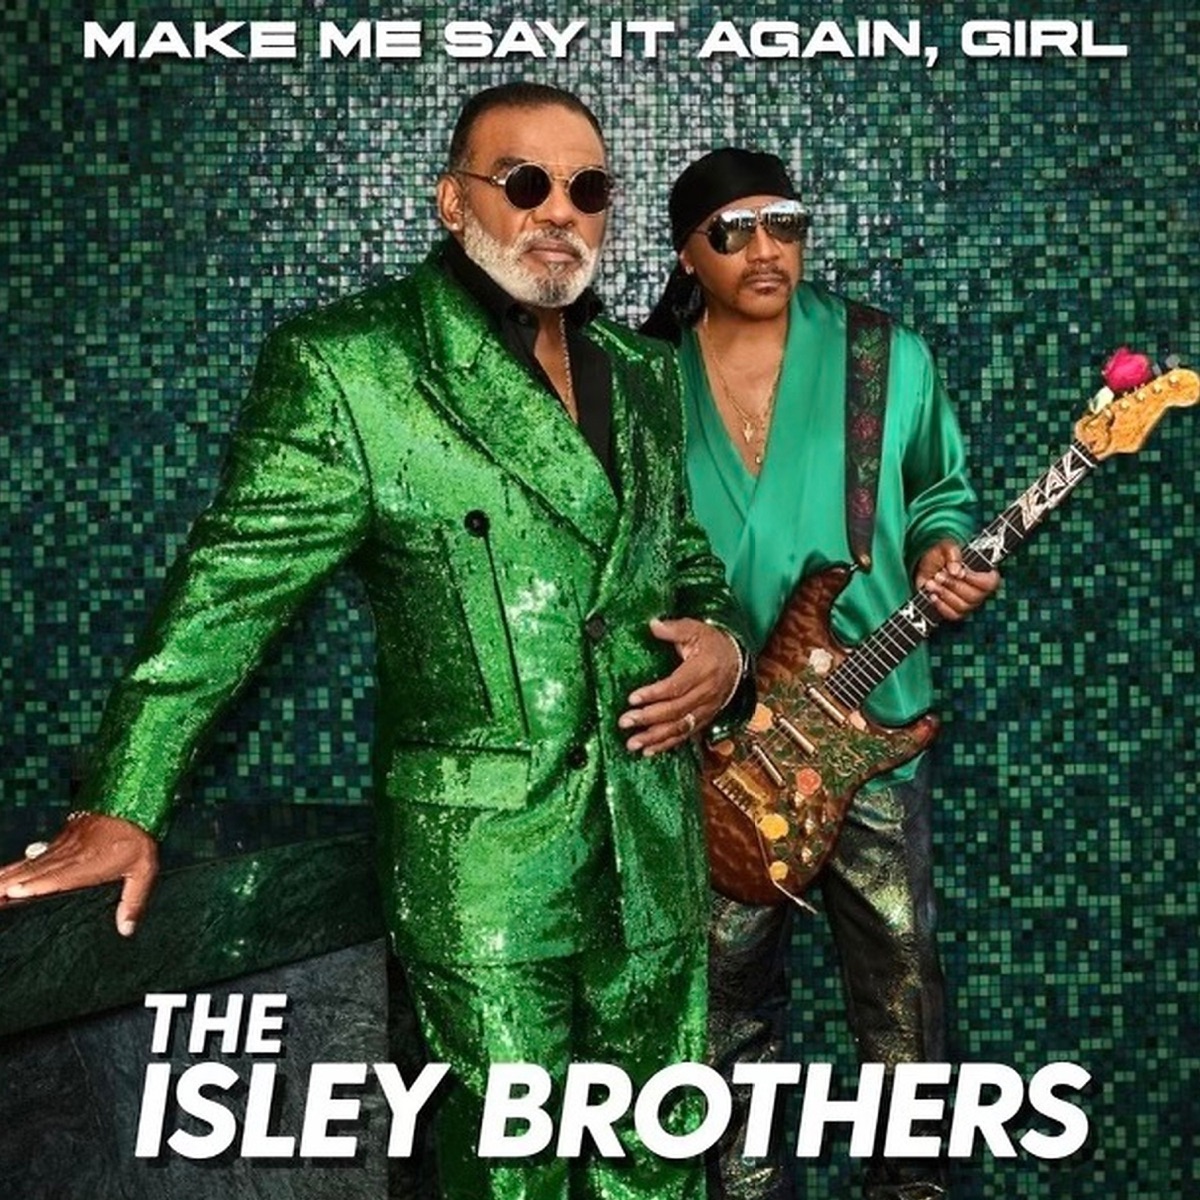 The Essential Isley Brothers by The Isley Brothers on Apple Music